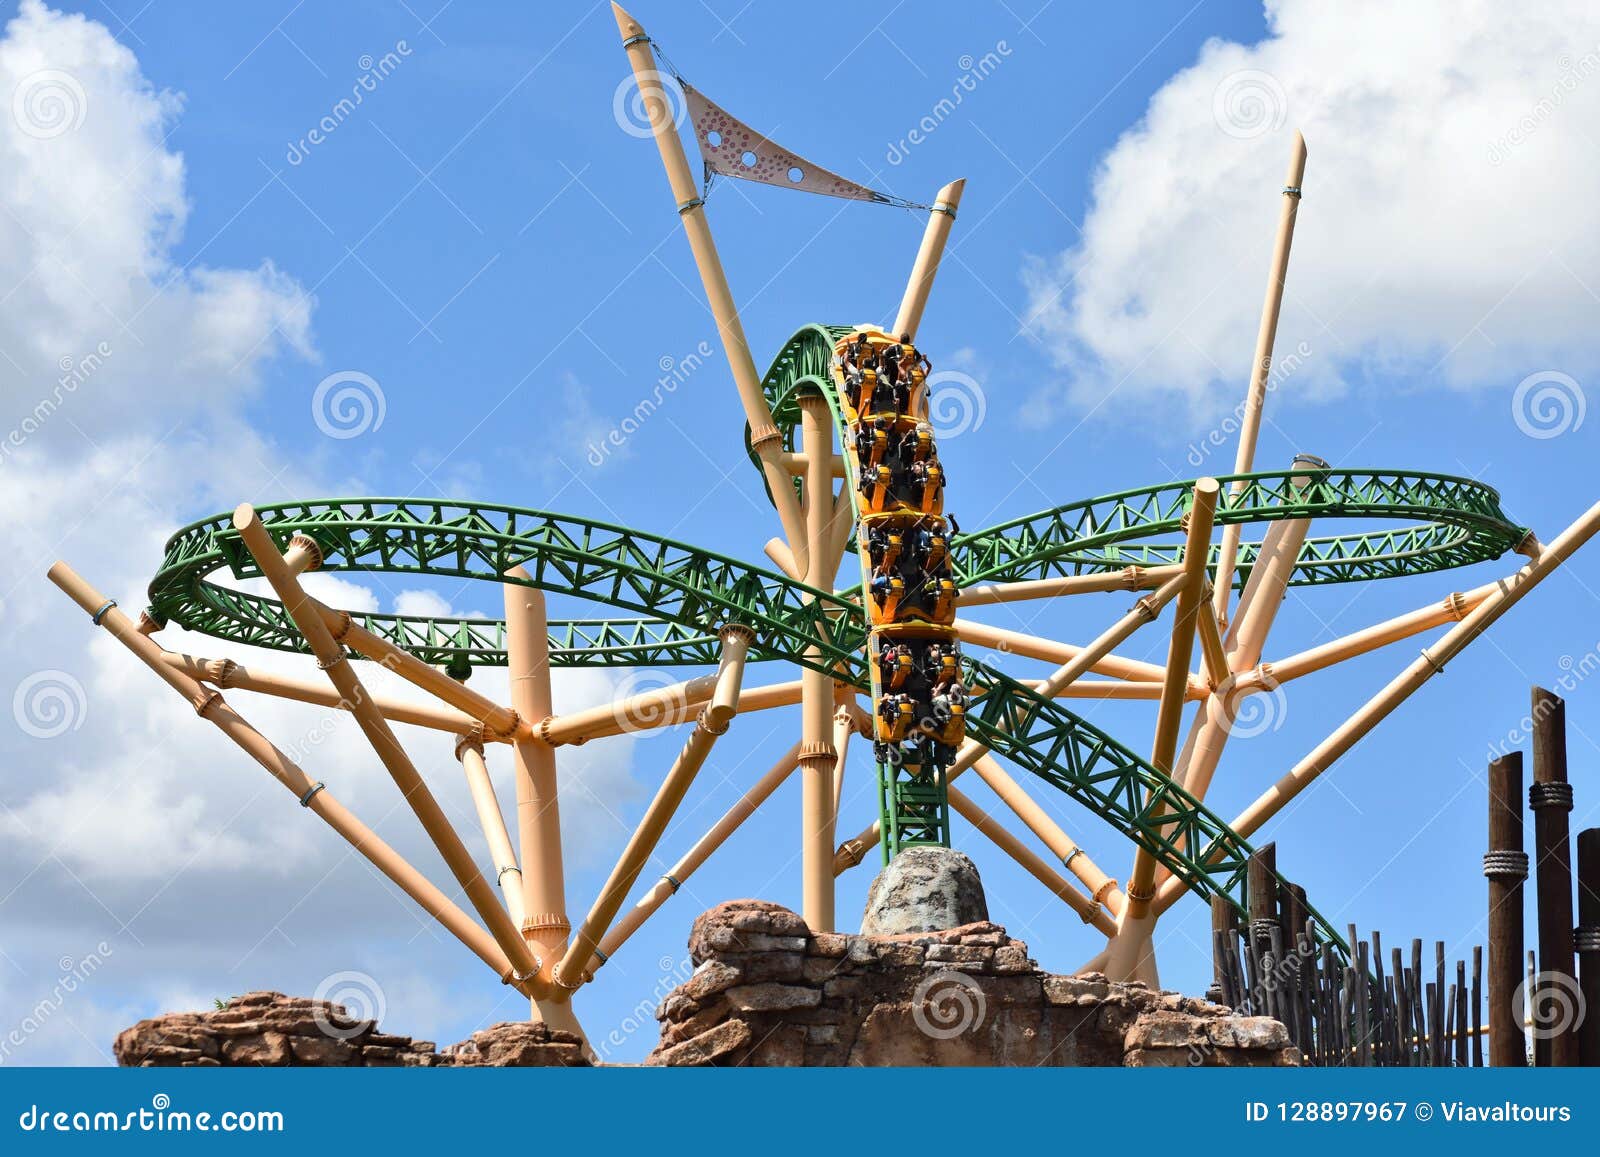 Cheetah Hunt Is A Thrilling Triple Launch Roller Coaster At Bush